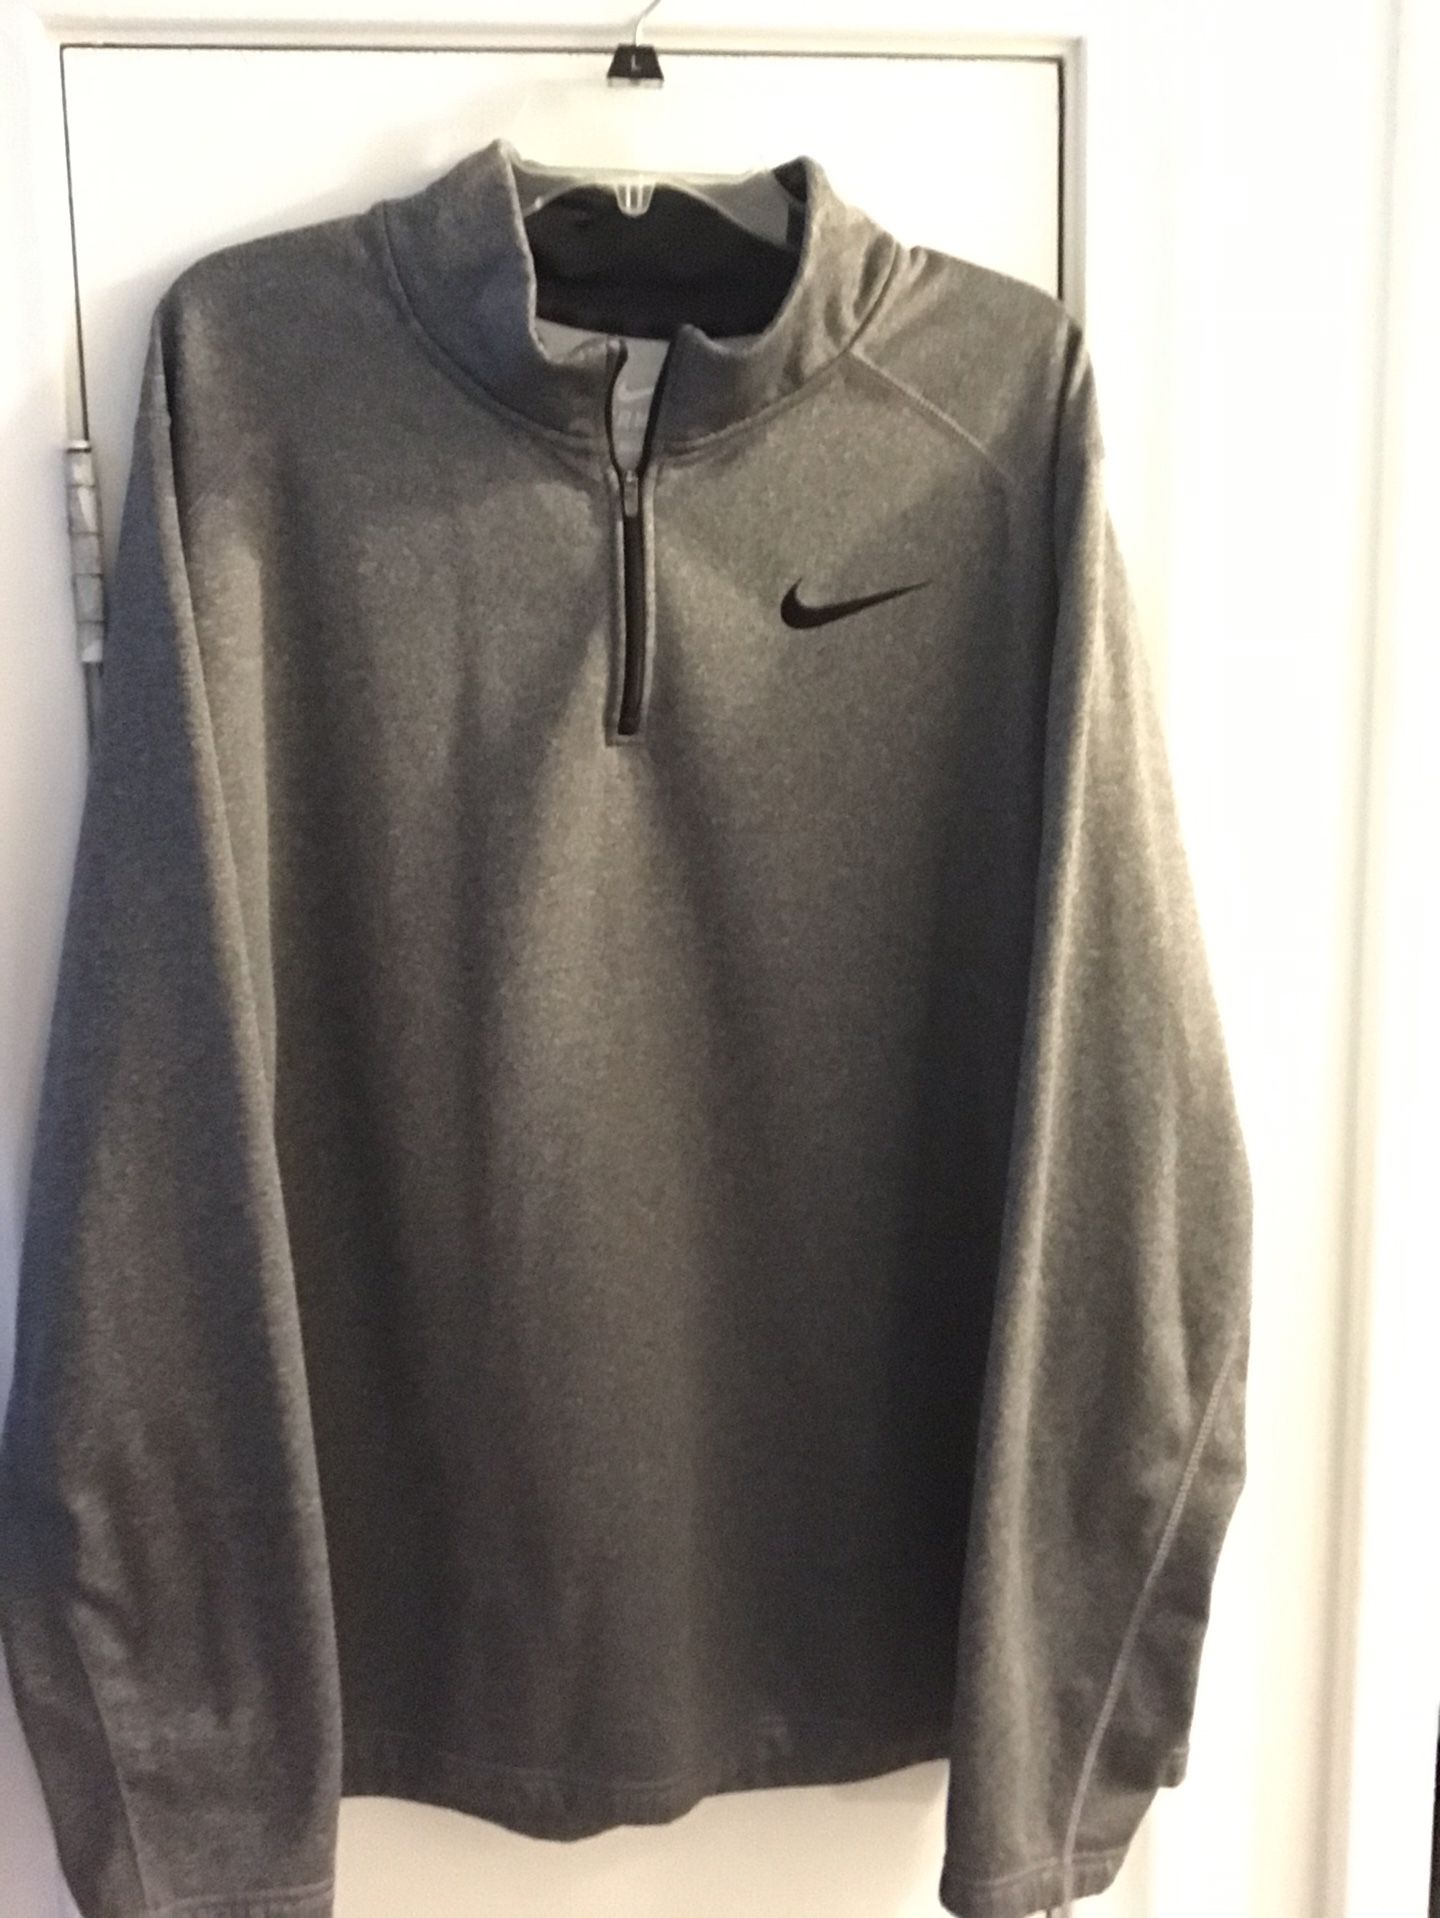 Nike 1/4 zip Thermafit pullover